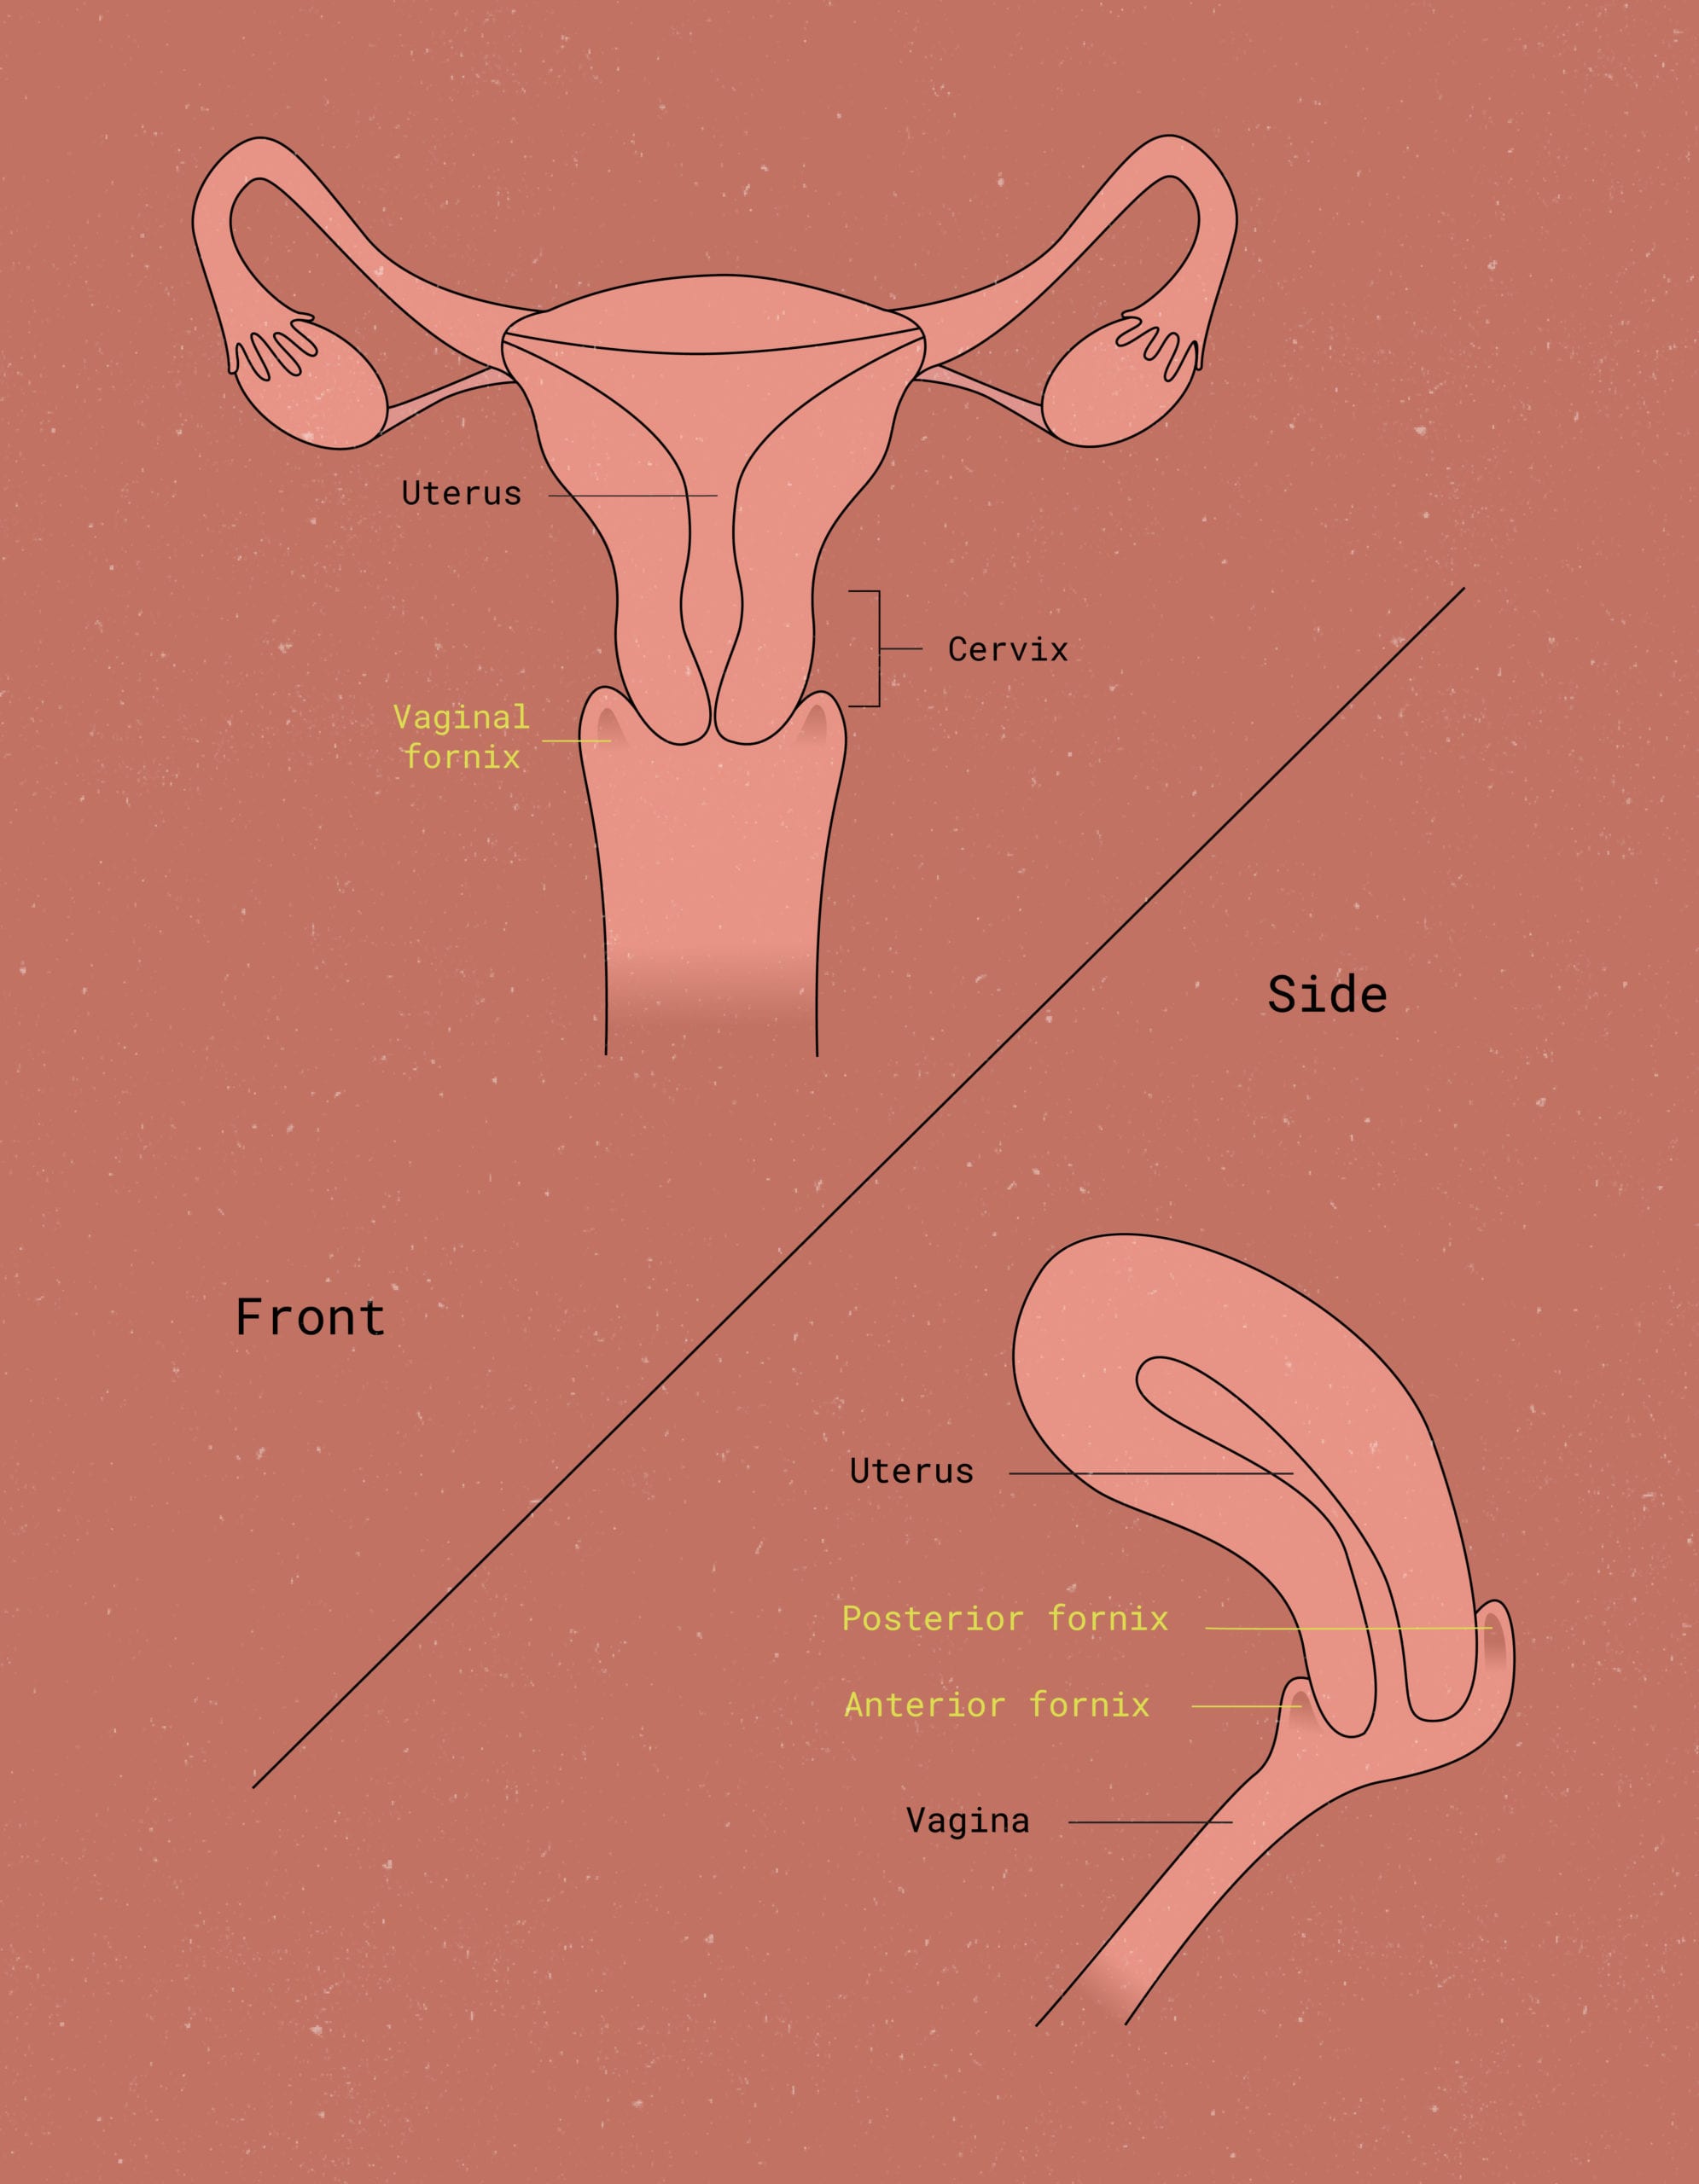 What is the vaginal fornix?